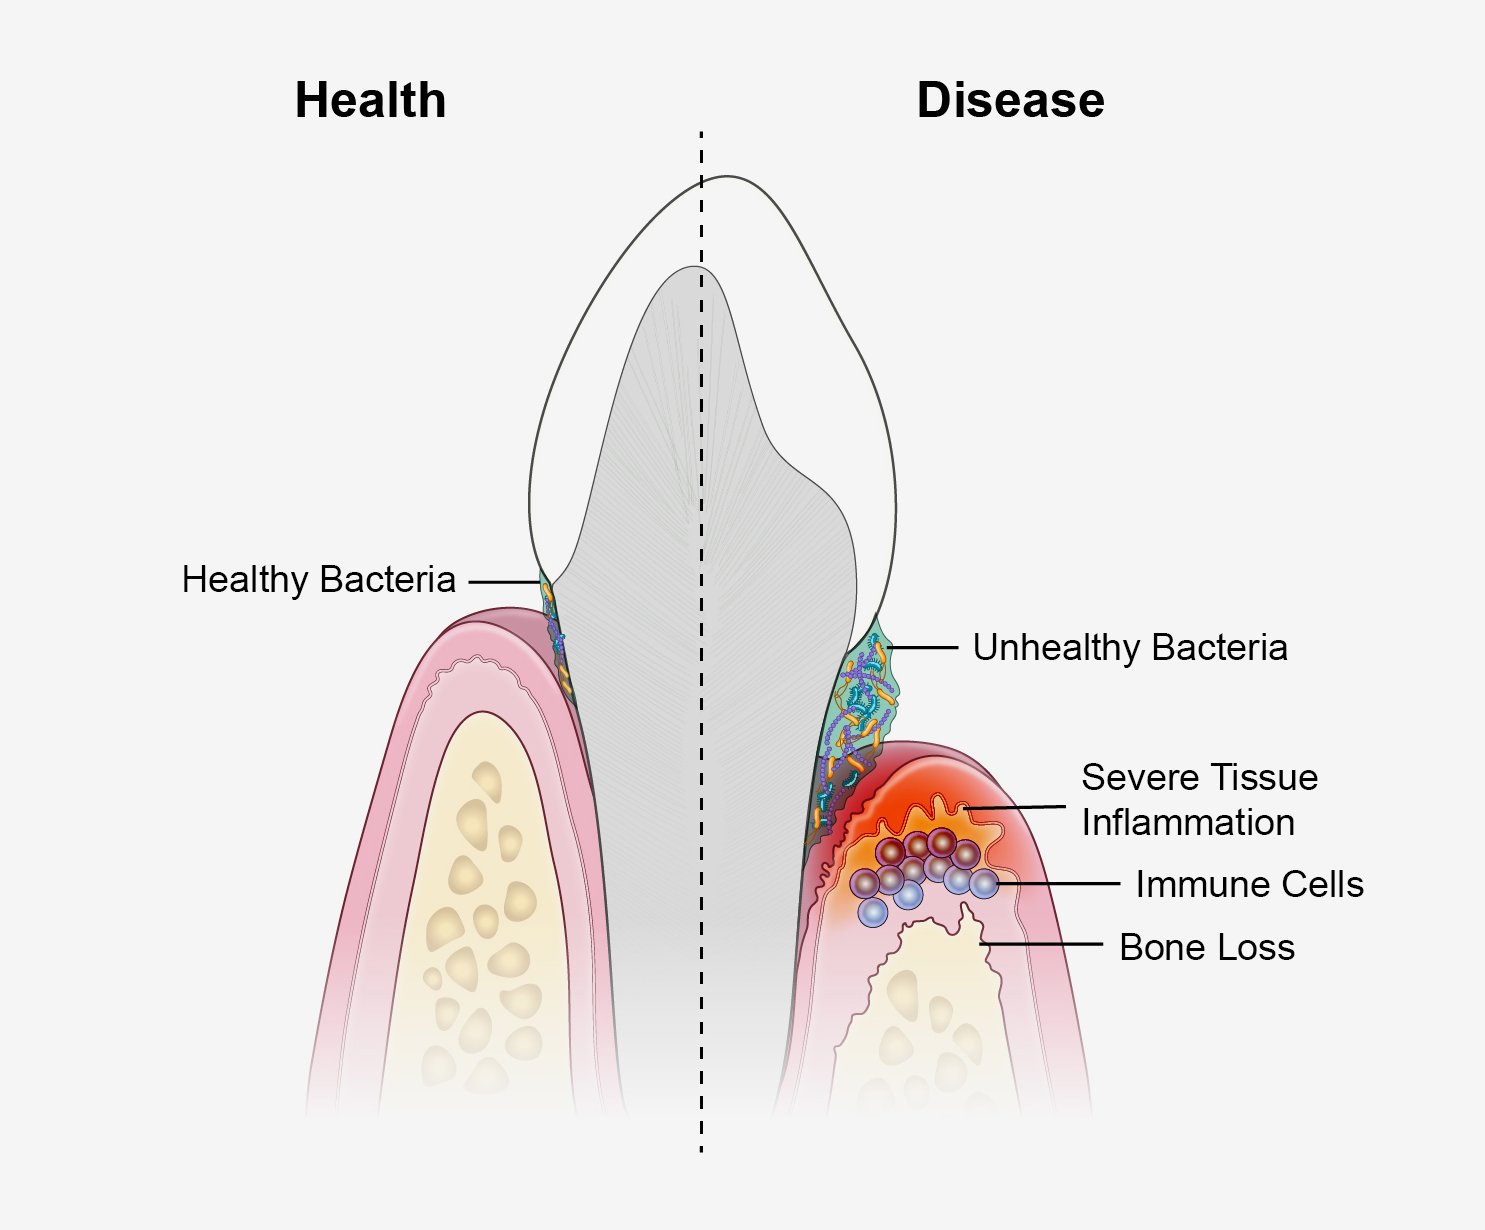 Image contrasts healthy gum tissue (left) and chronic periodontal disease (right).